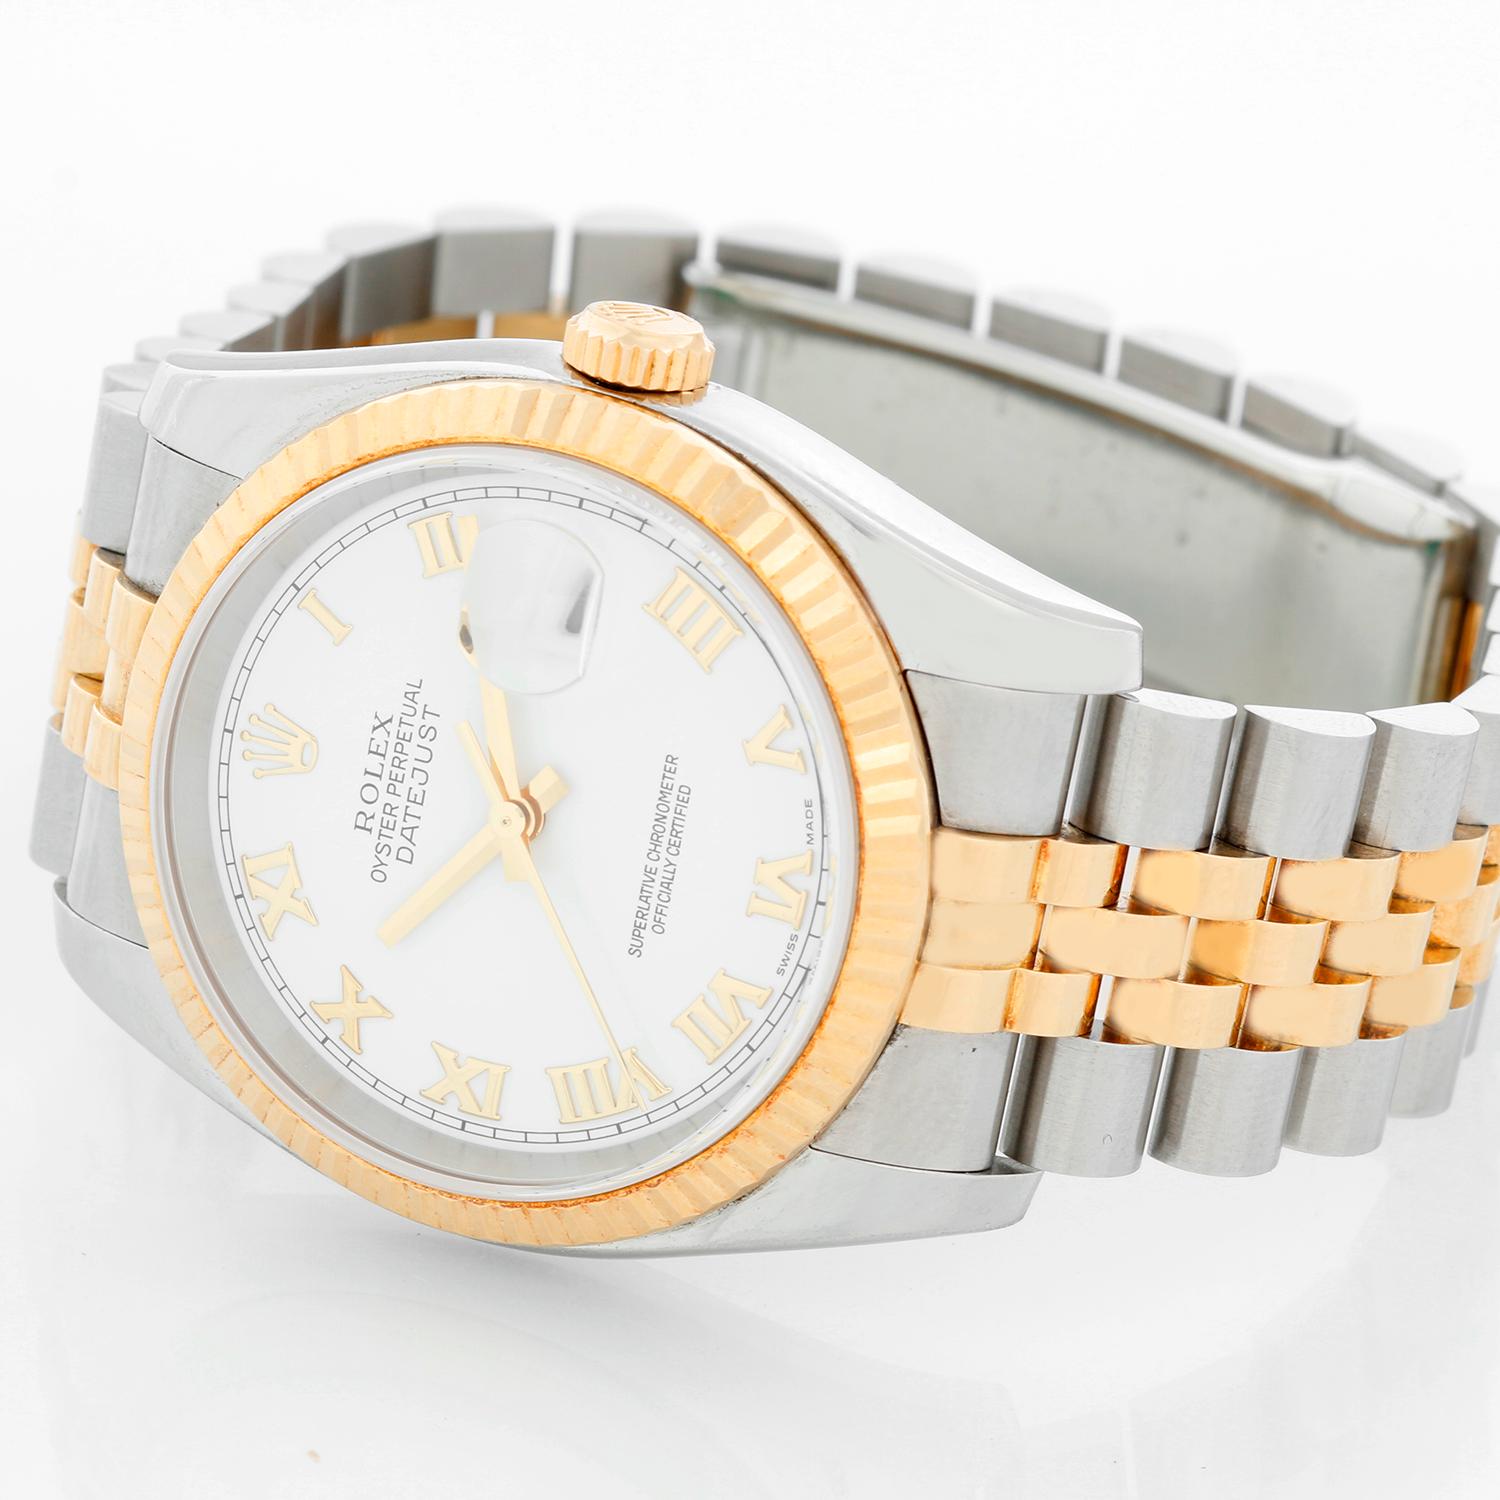 Rolex Datejust Men's 2-Tone Watch 116233 - Automatic winding, 31 jewels, Quickset, sapphire crystal. Stainless steel case with 18k yellow gold fluted bezel (36mm diameter). White dial with Roman numerals . Stainless steel and 18k yellow gold Jubilee